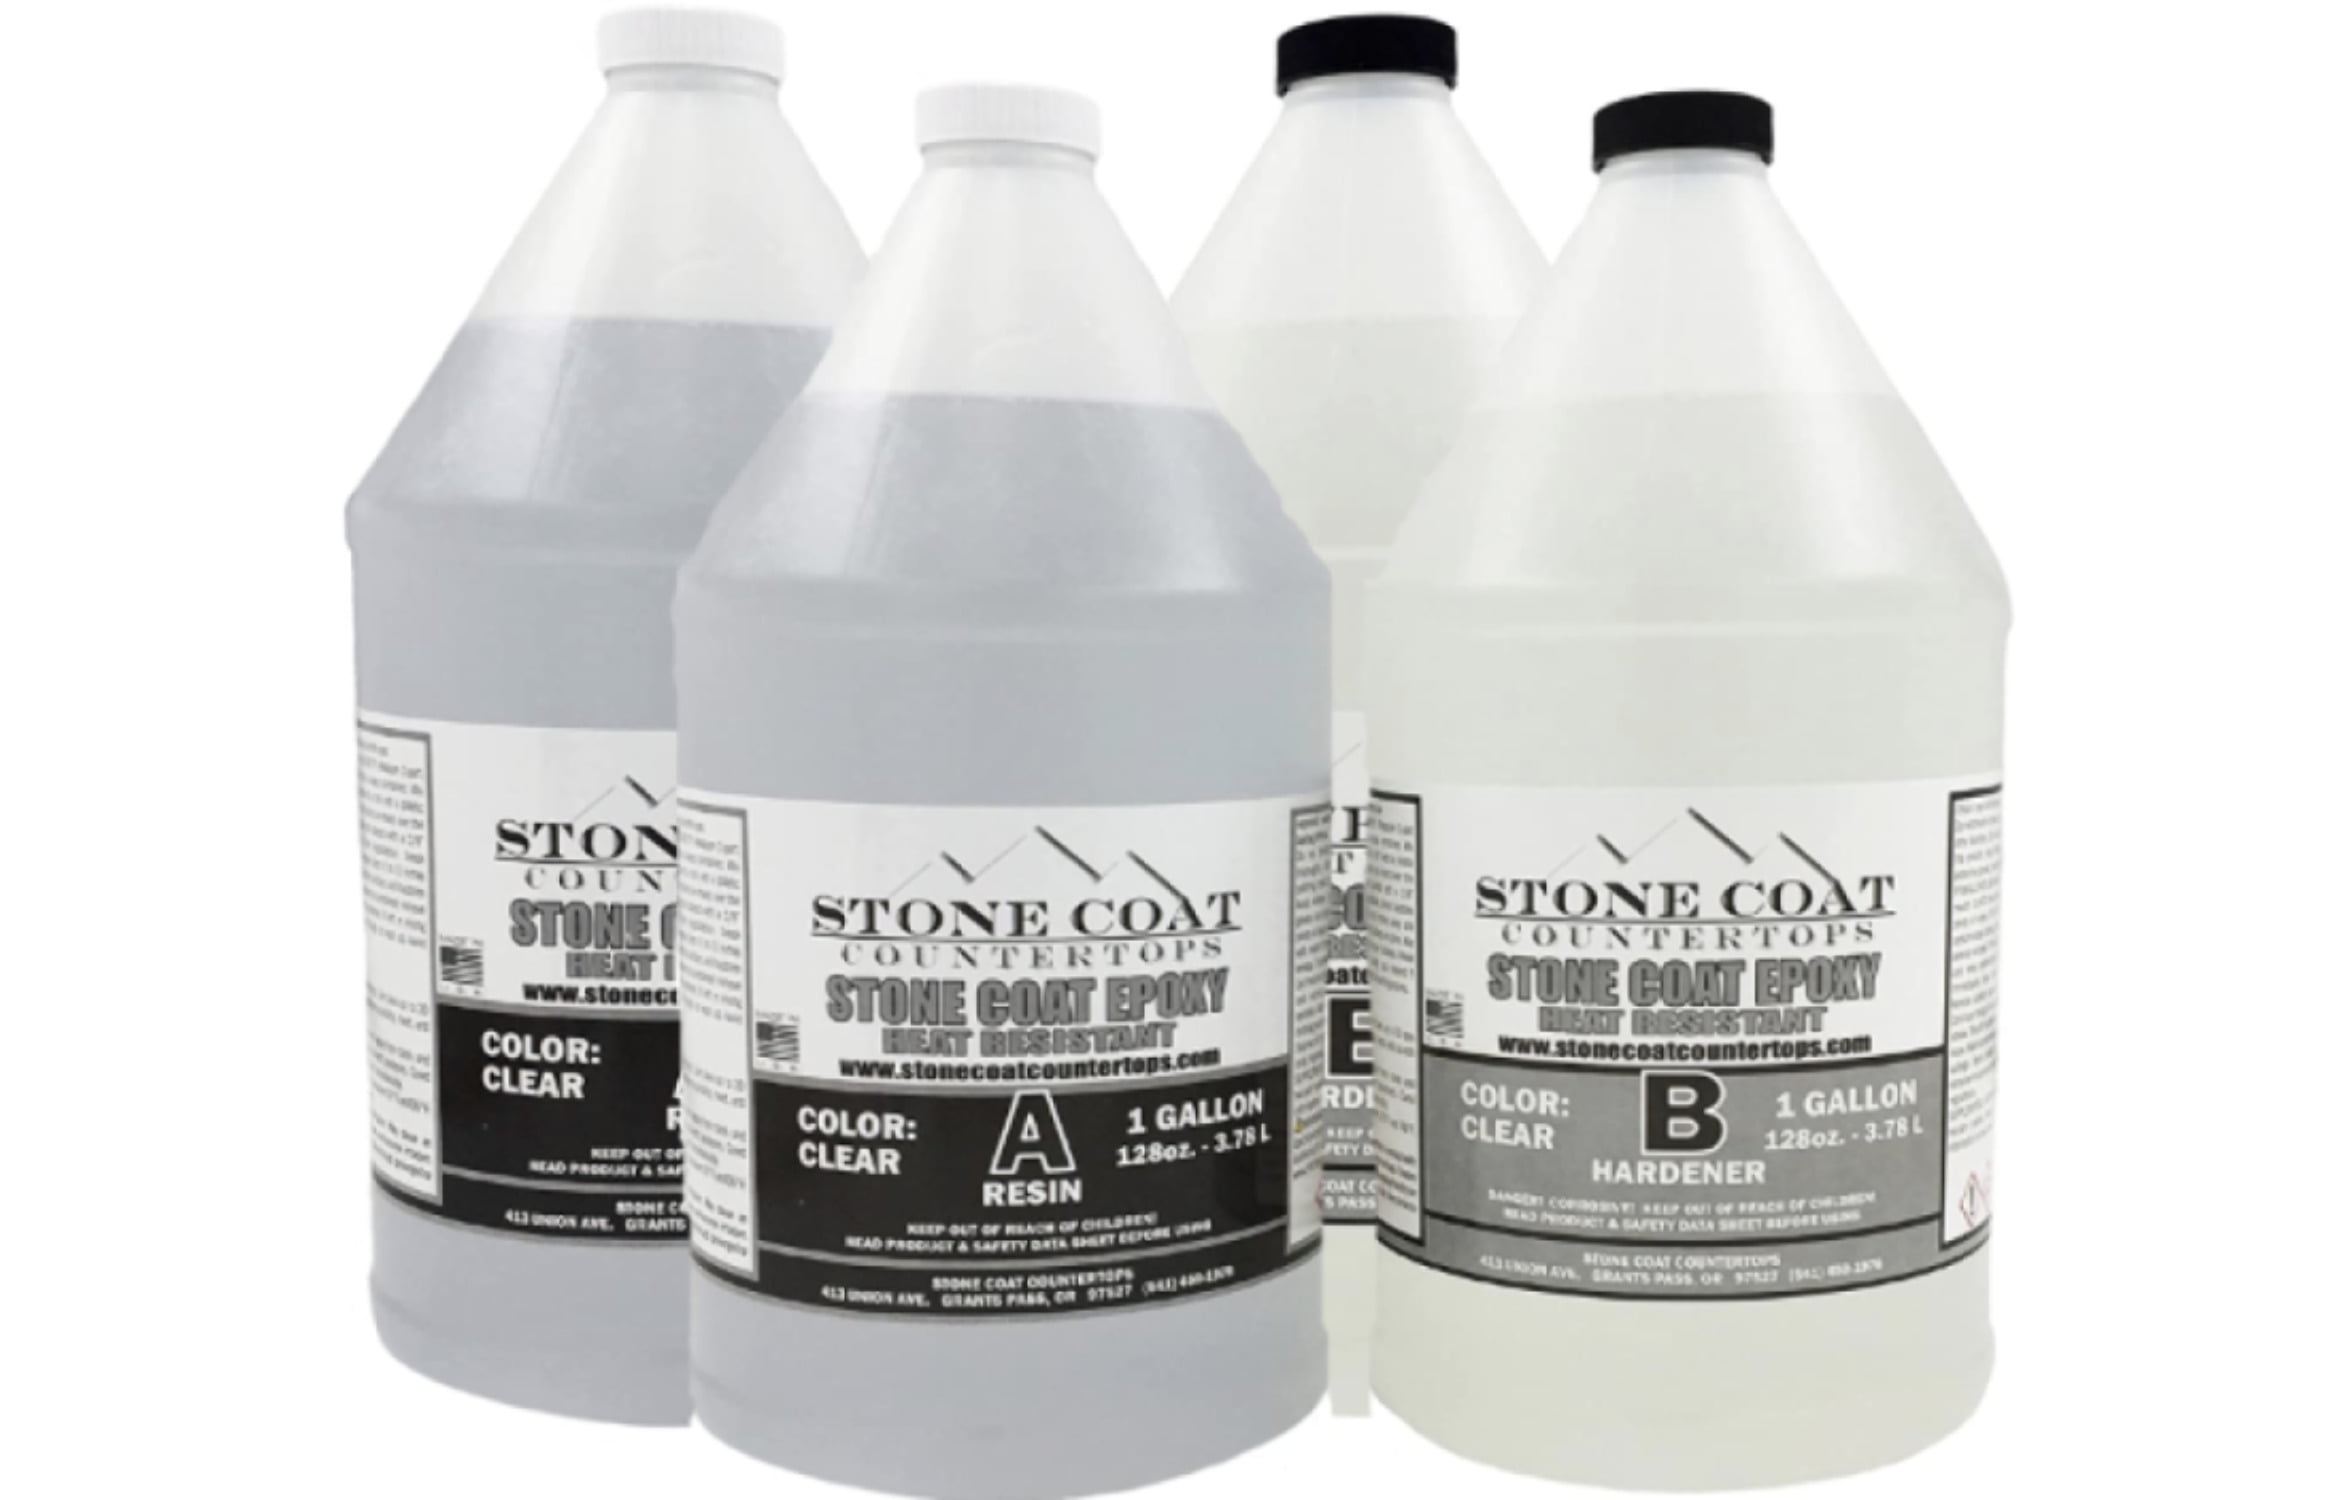 Stone Coat Countertops (4 Gallon) Epoxy Resin Kit for DIY Projects ...